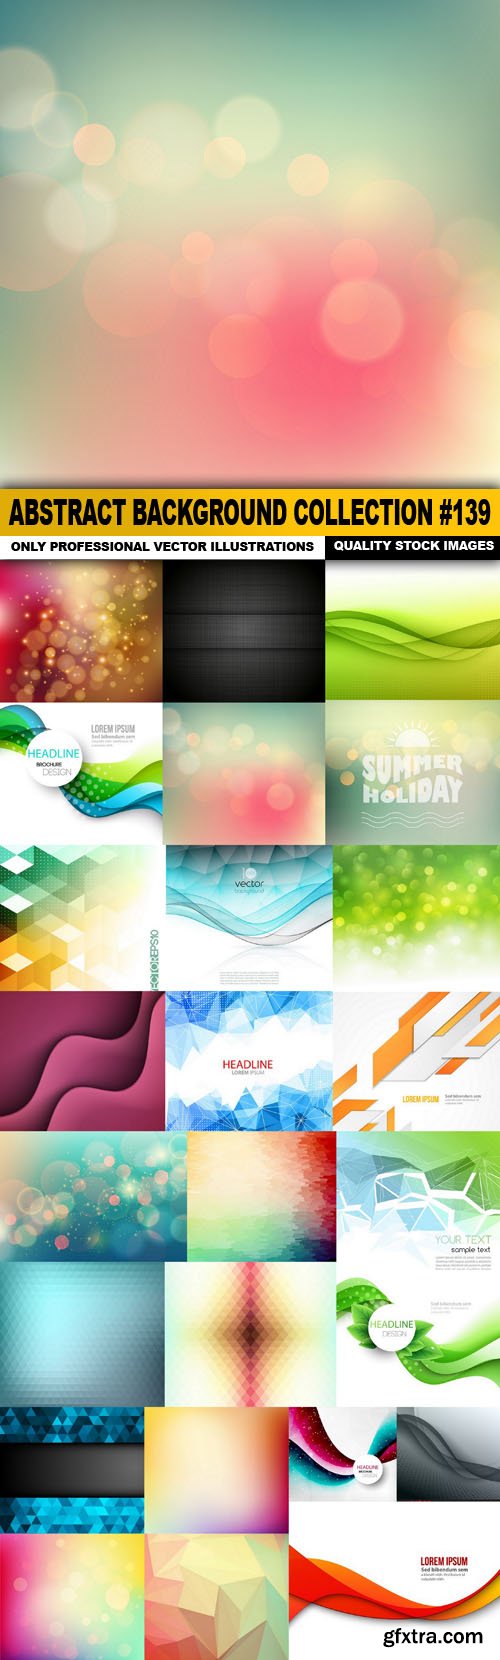 Abstract Background Collection #139 - 25 Vector